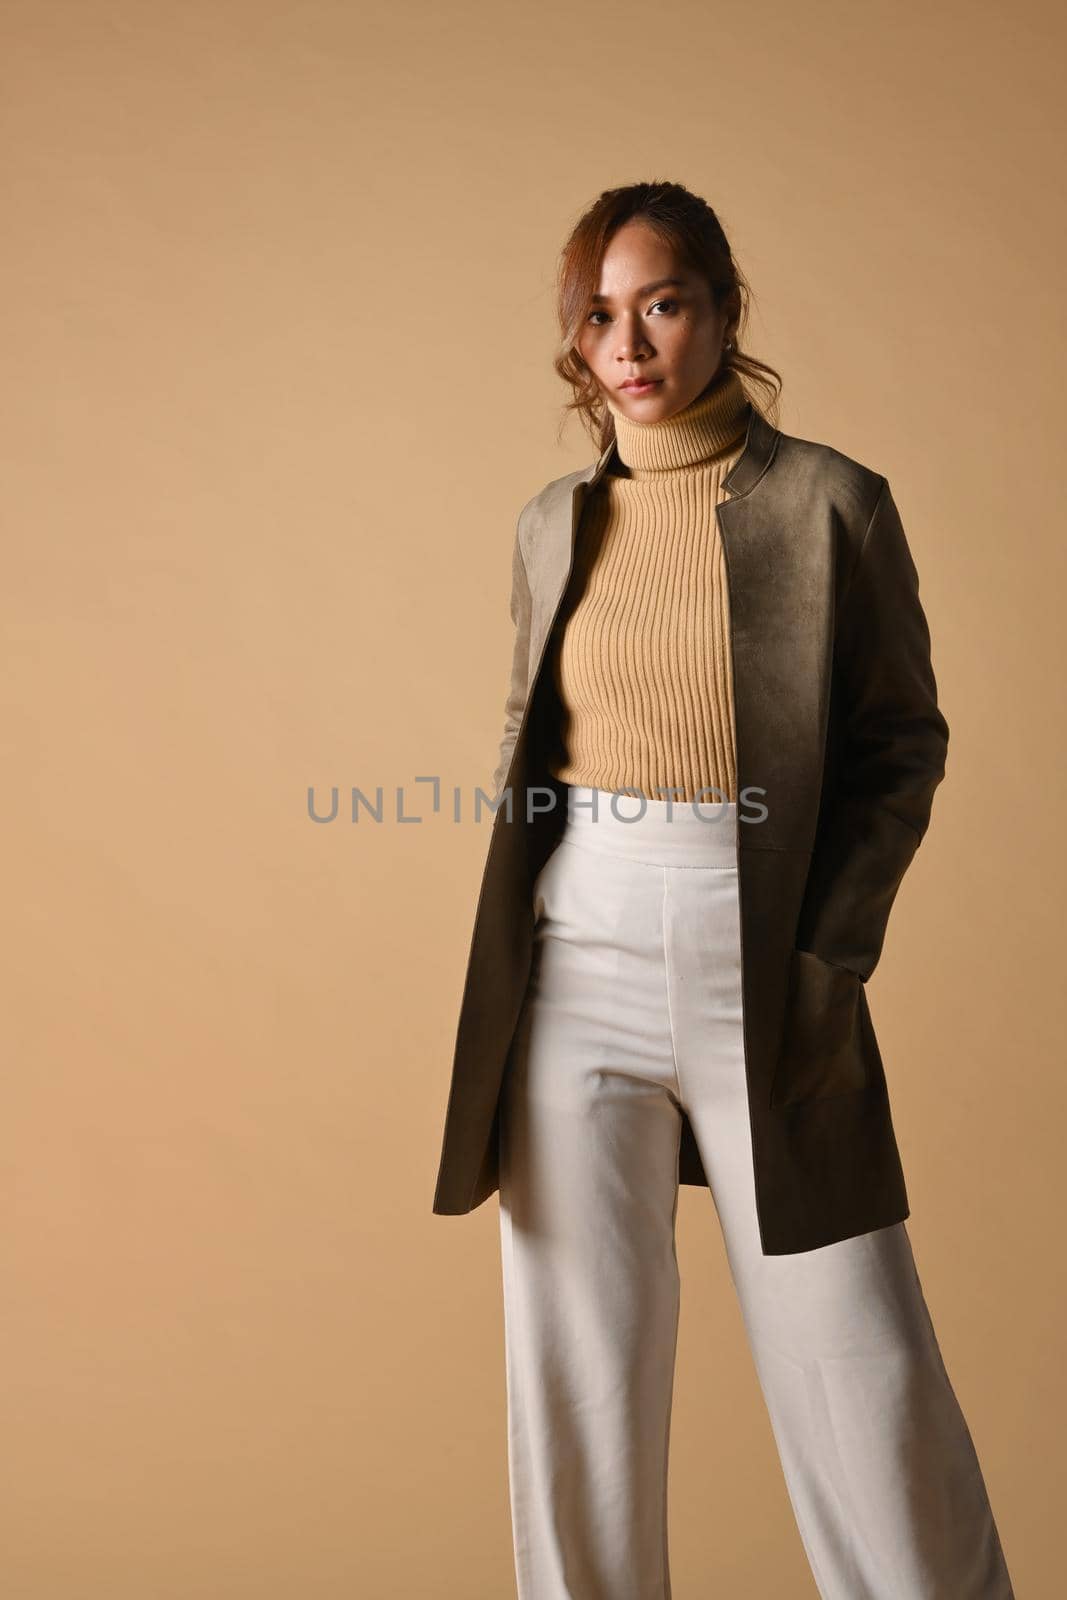 Portrait of tendy woman wiith trench coat standing on beige background. Fashion studio photo, Autumn and Winter concept.